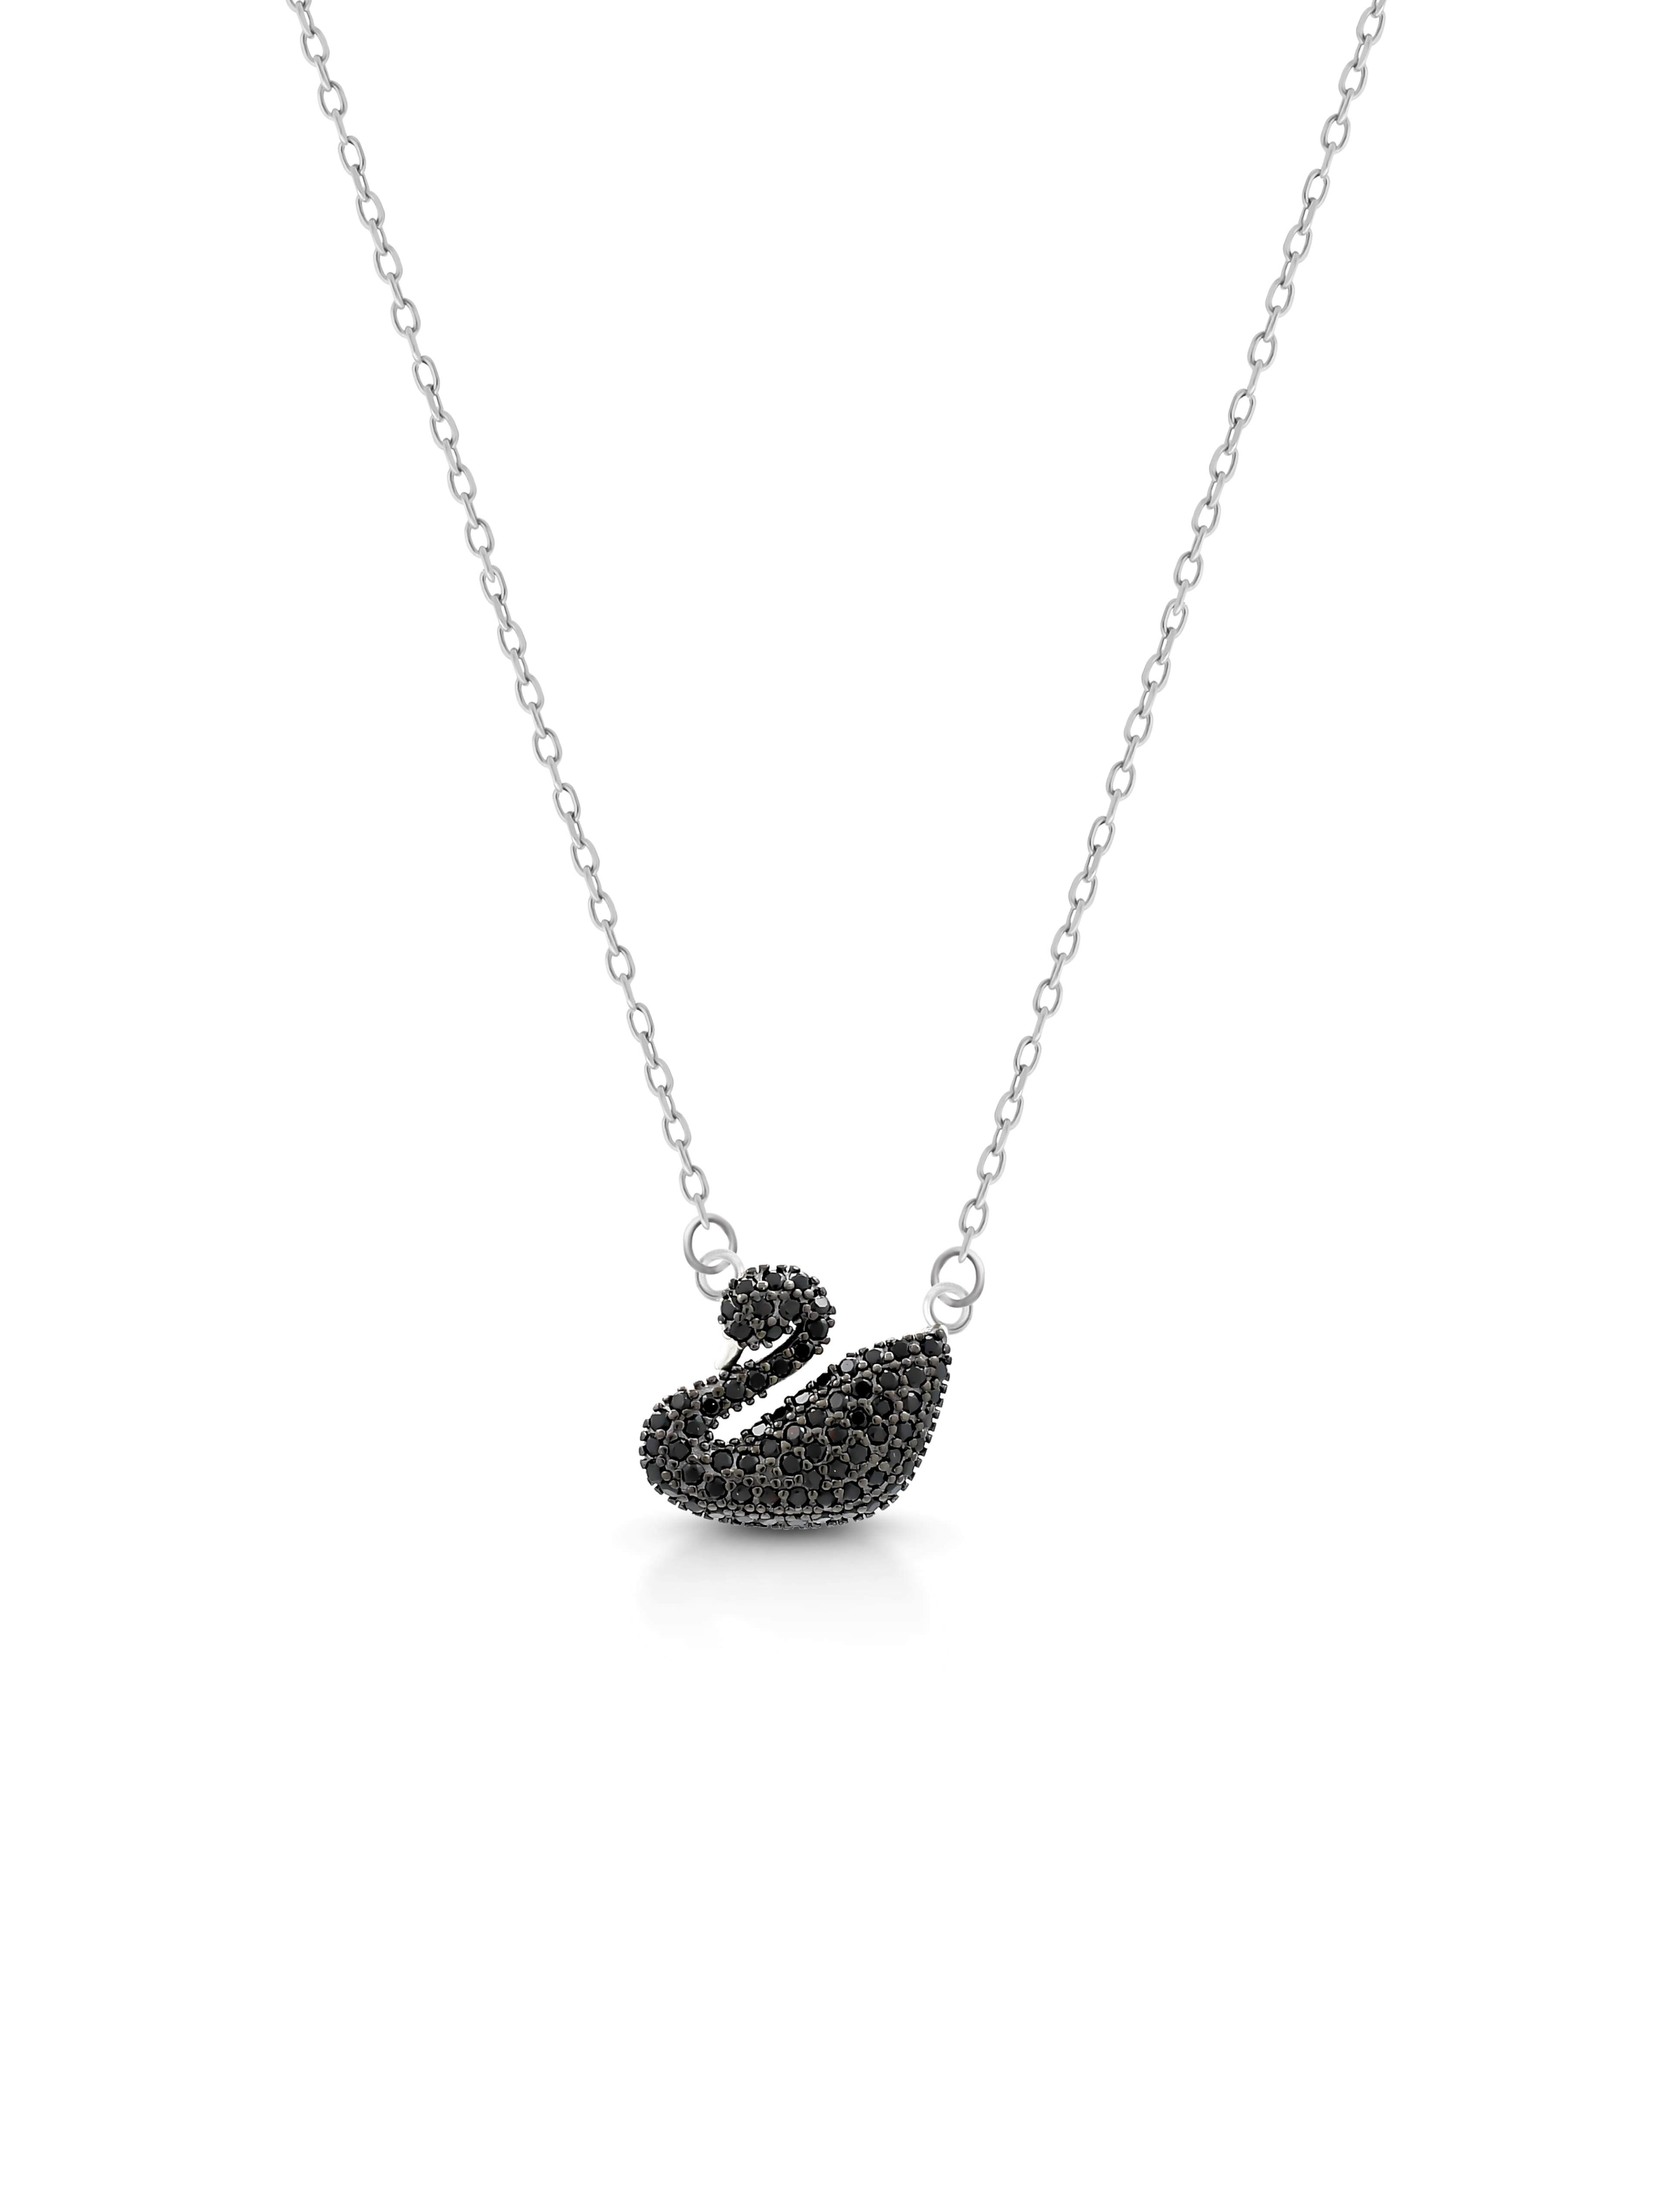 SWAN PENDANT WITH CHAIN